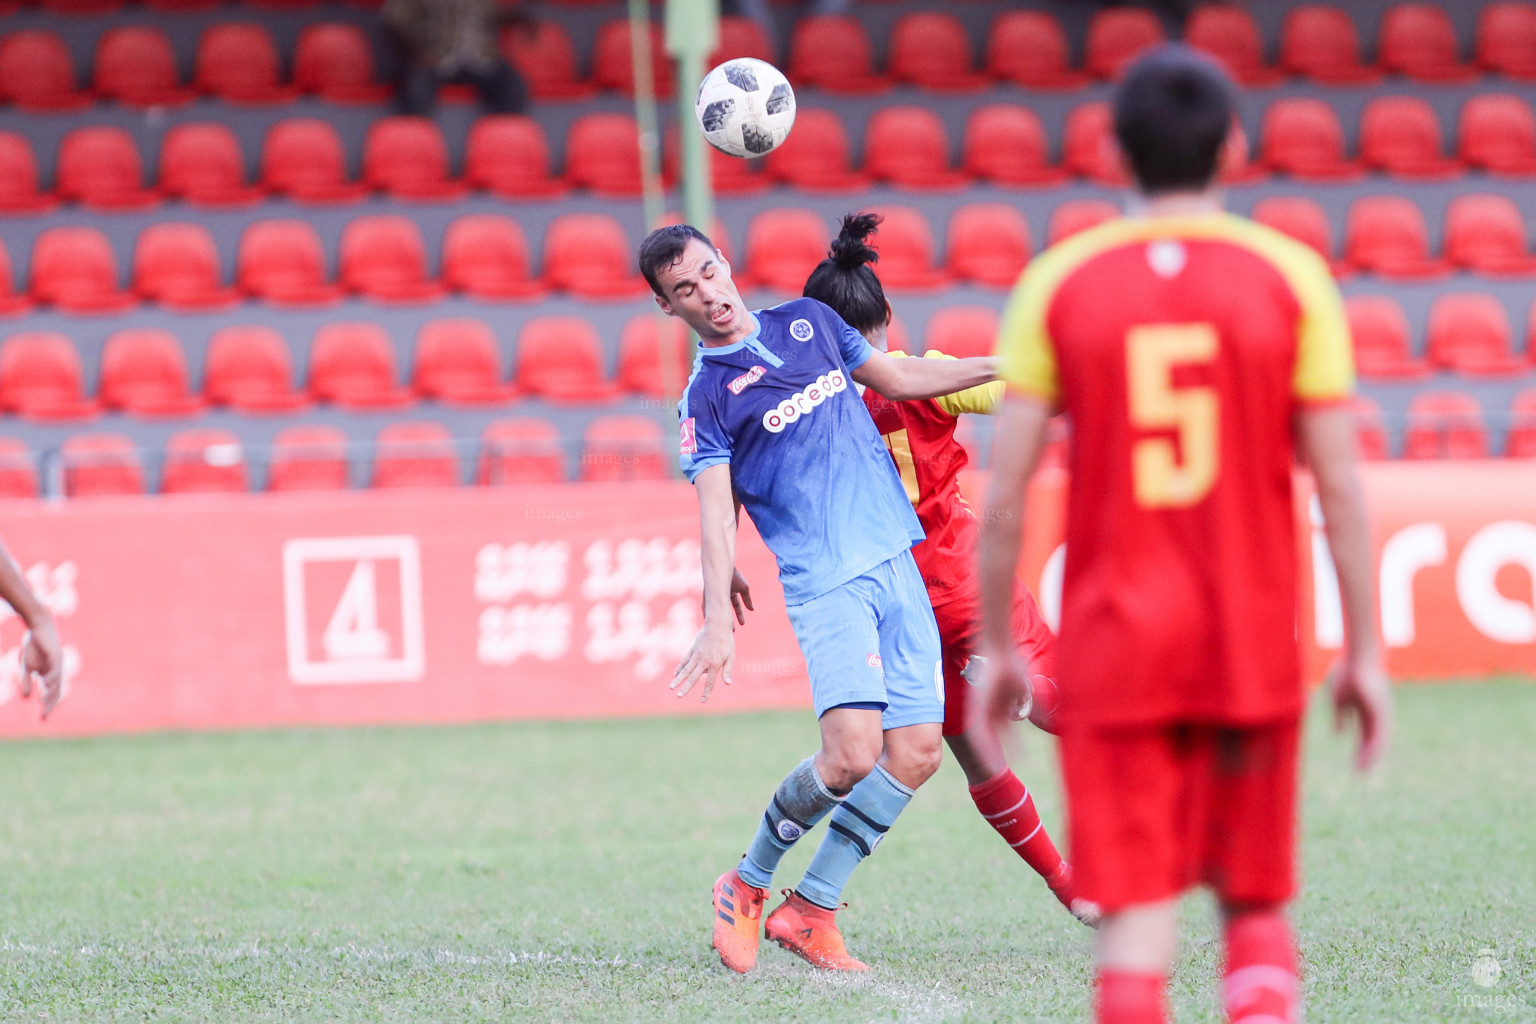 New Radiant SC vs Victory SC in Dhiraagu Dhivehi Premier League 2018 in Male, Maldives, Monday, October 8, 2018. (Images.mv Photo/Suadh Abdul Sattar)